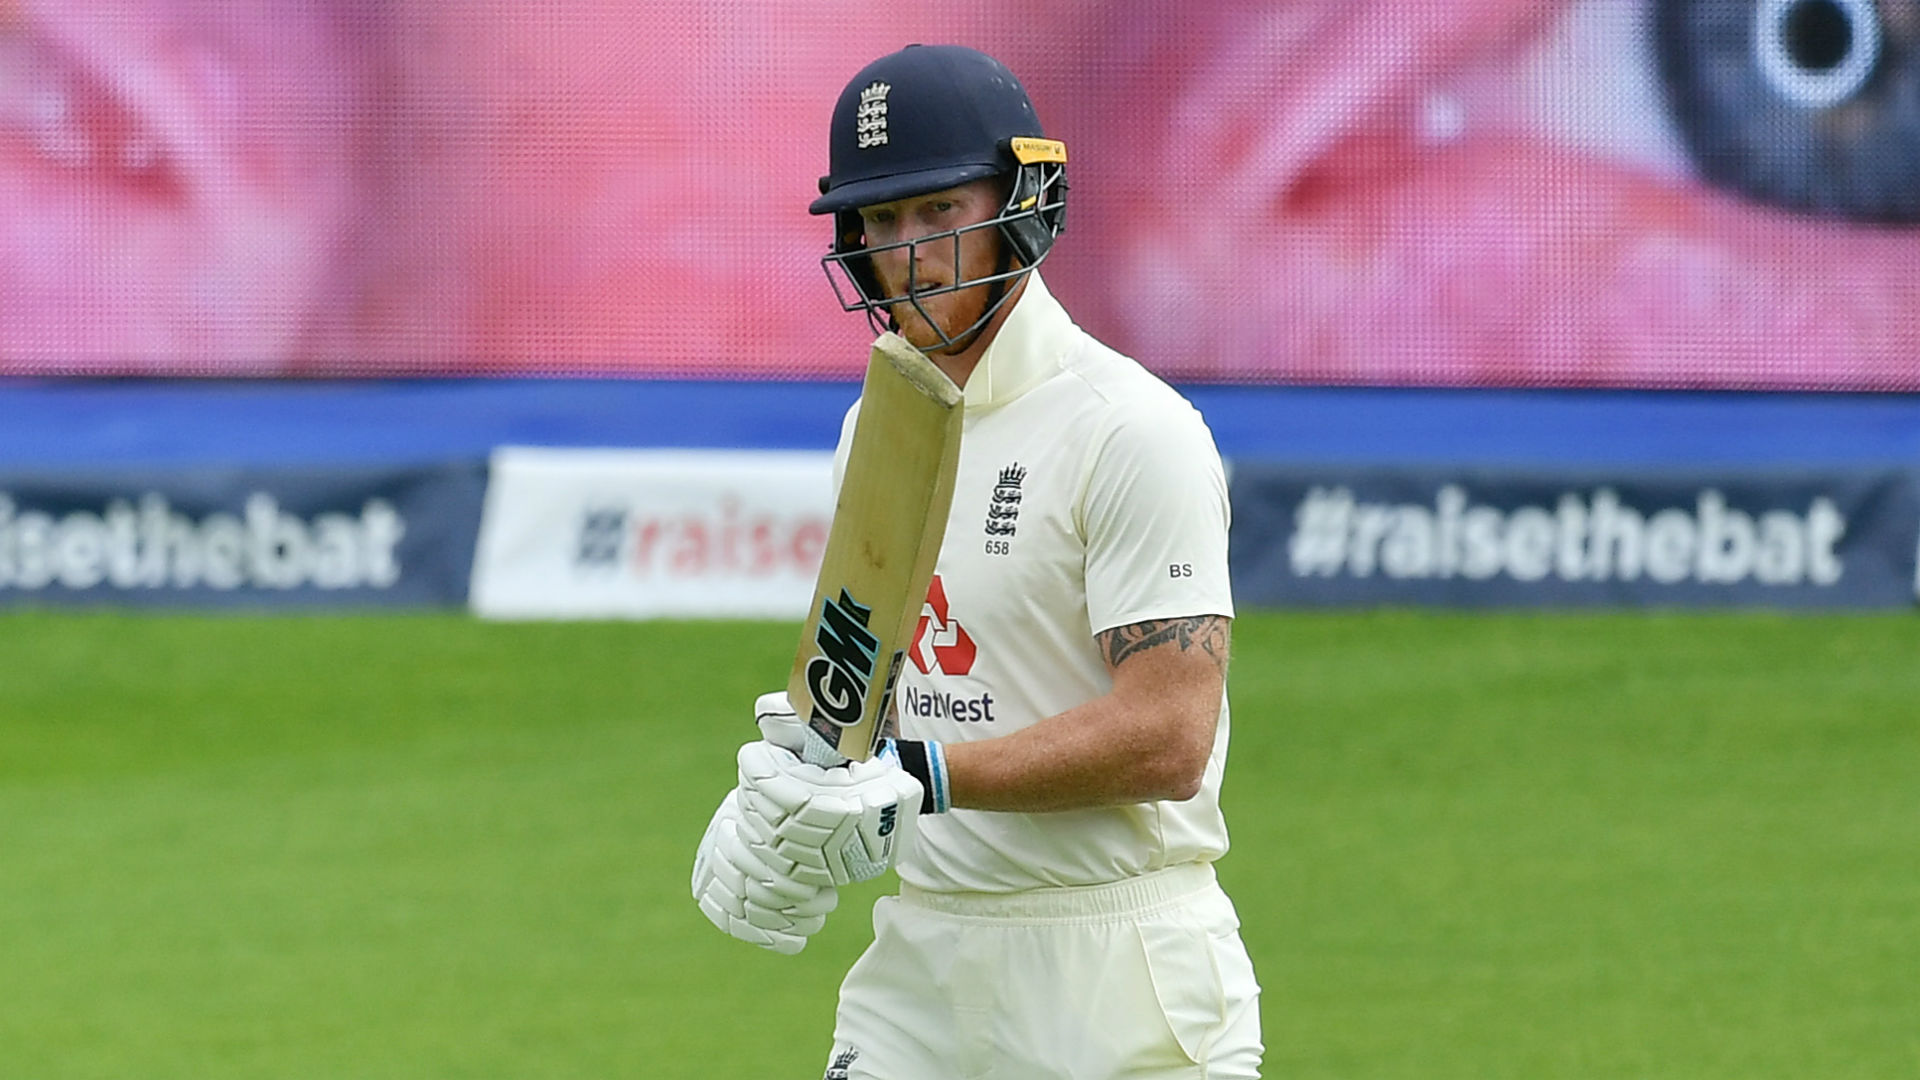 England will be without Ben Stokes for the Test series with New Zealand after the extent of his broken finger was confirmed.